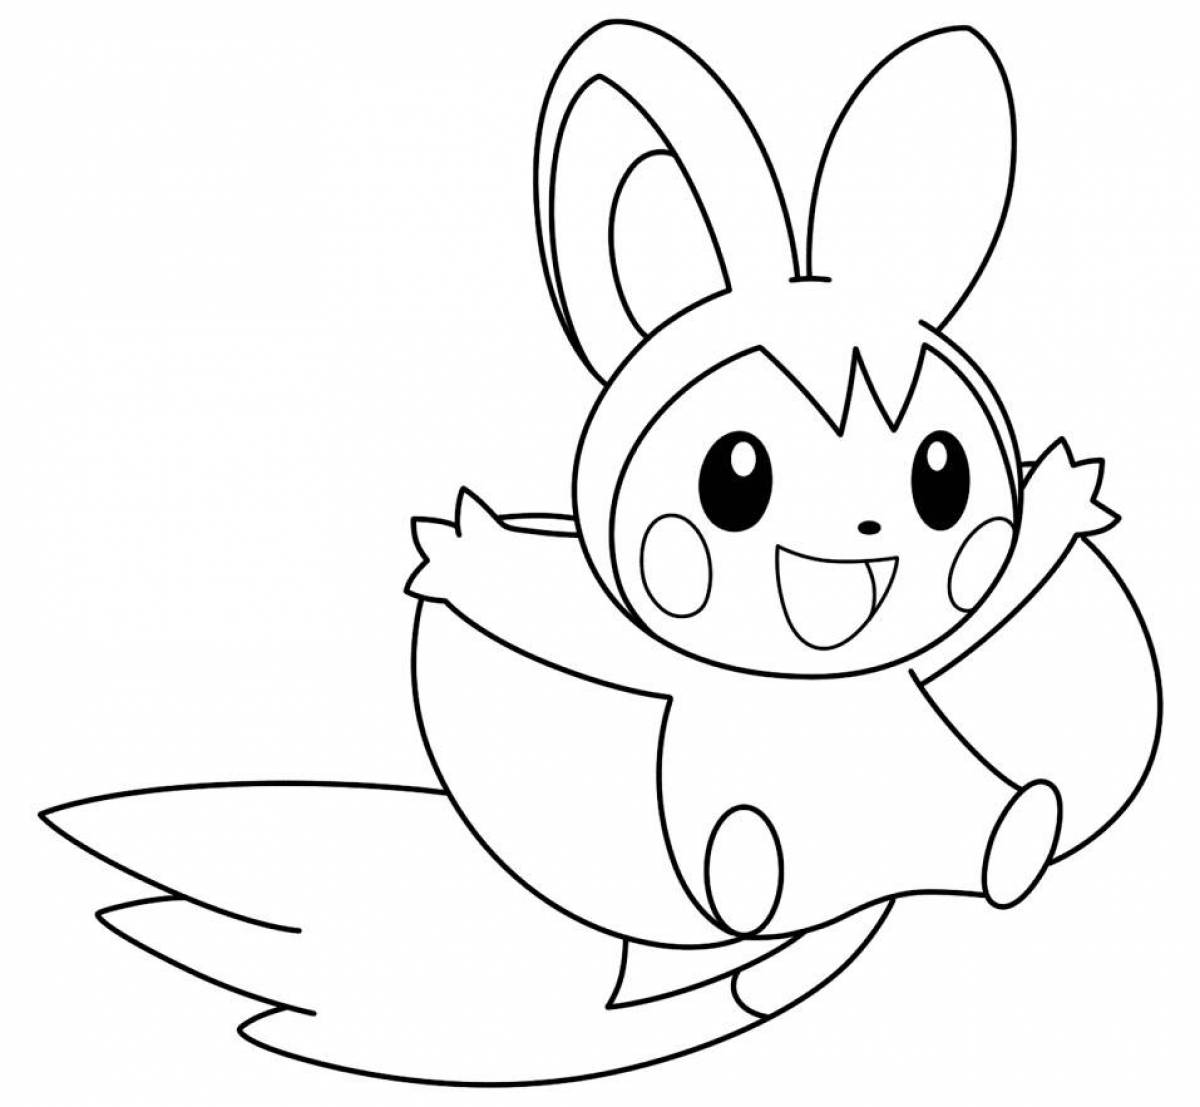 Magical pikachu coloring page